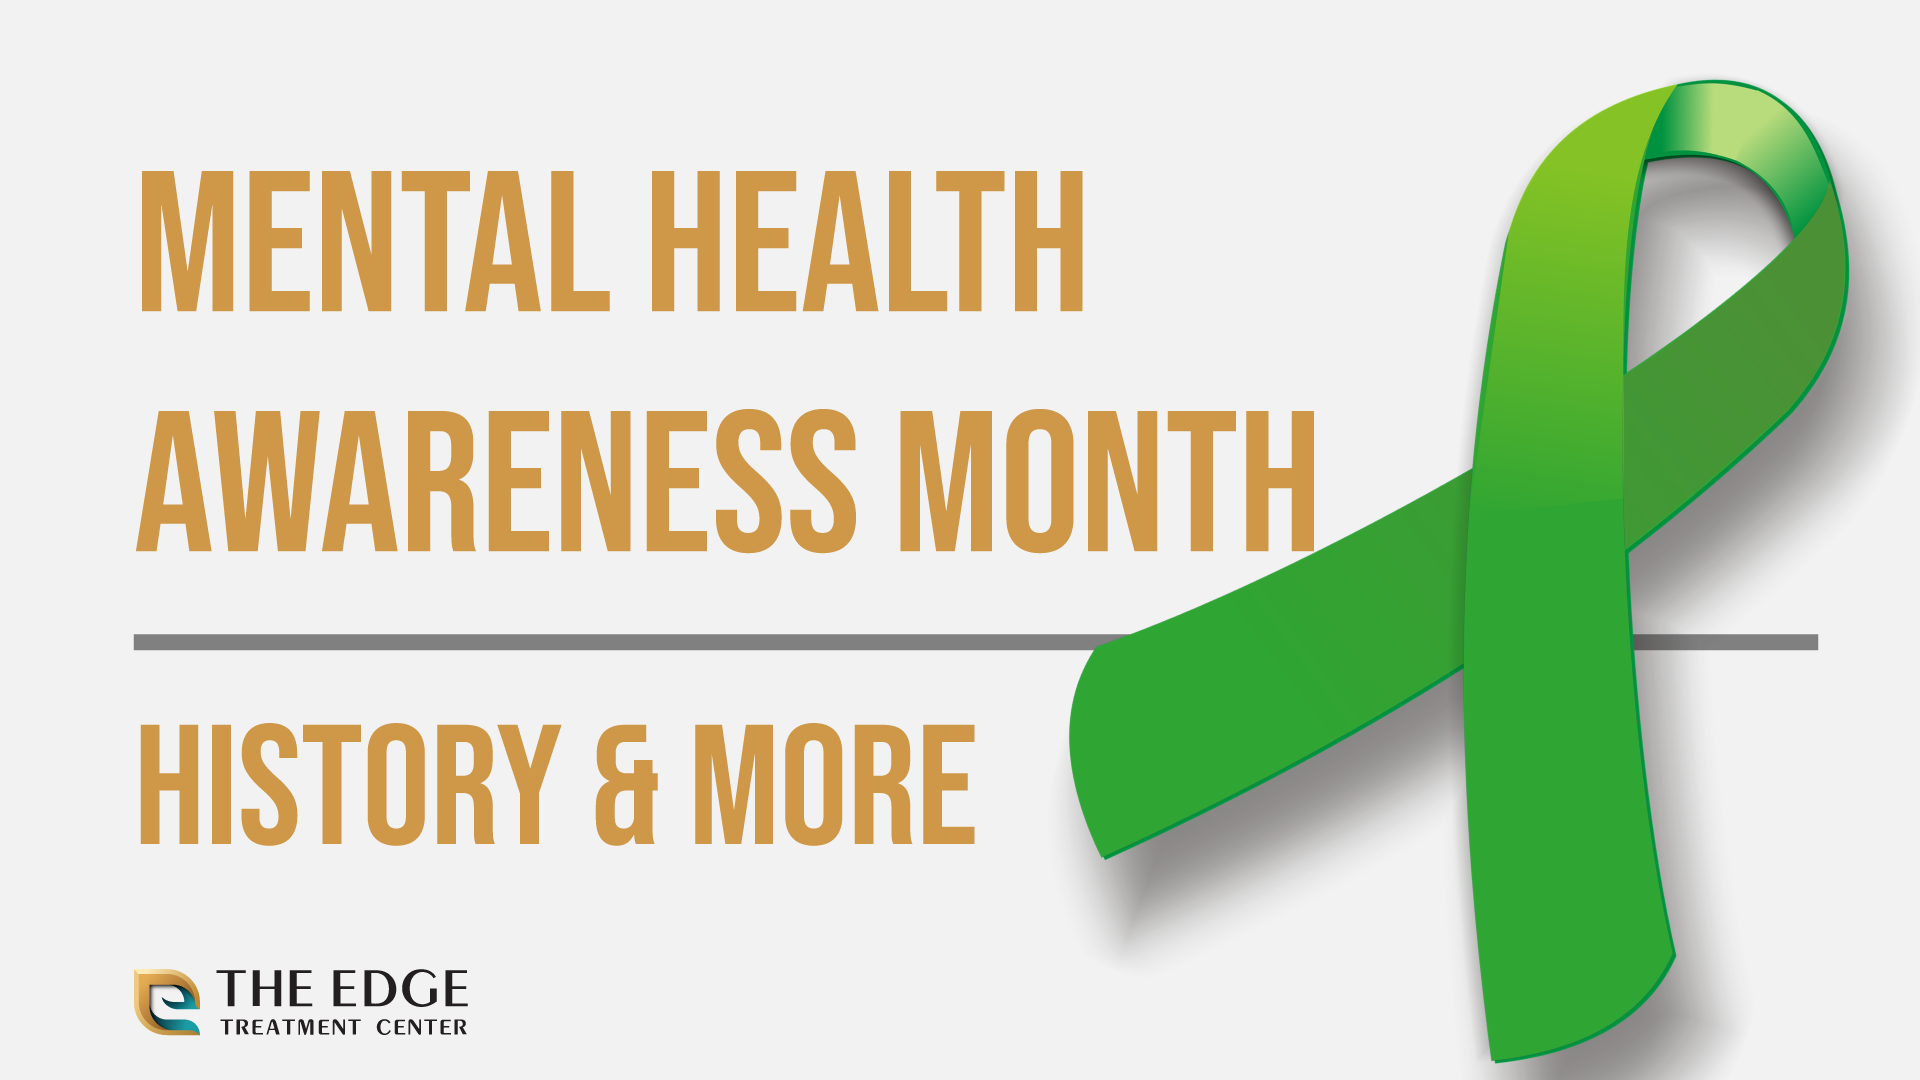 Mental Health Awareness Month: Make May a Month of Change